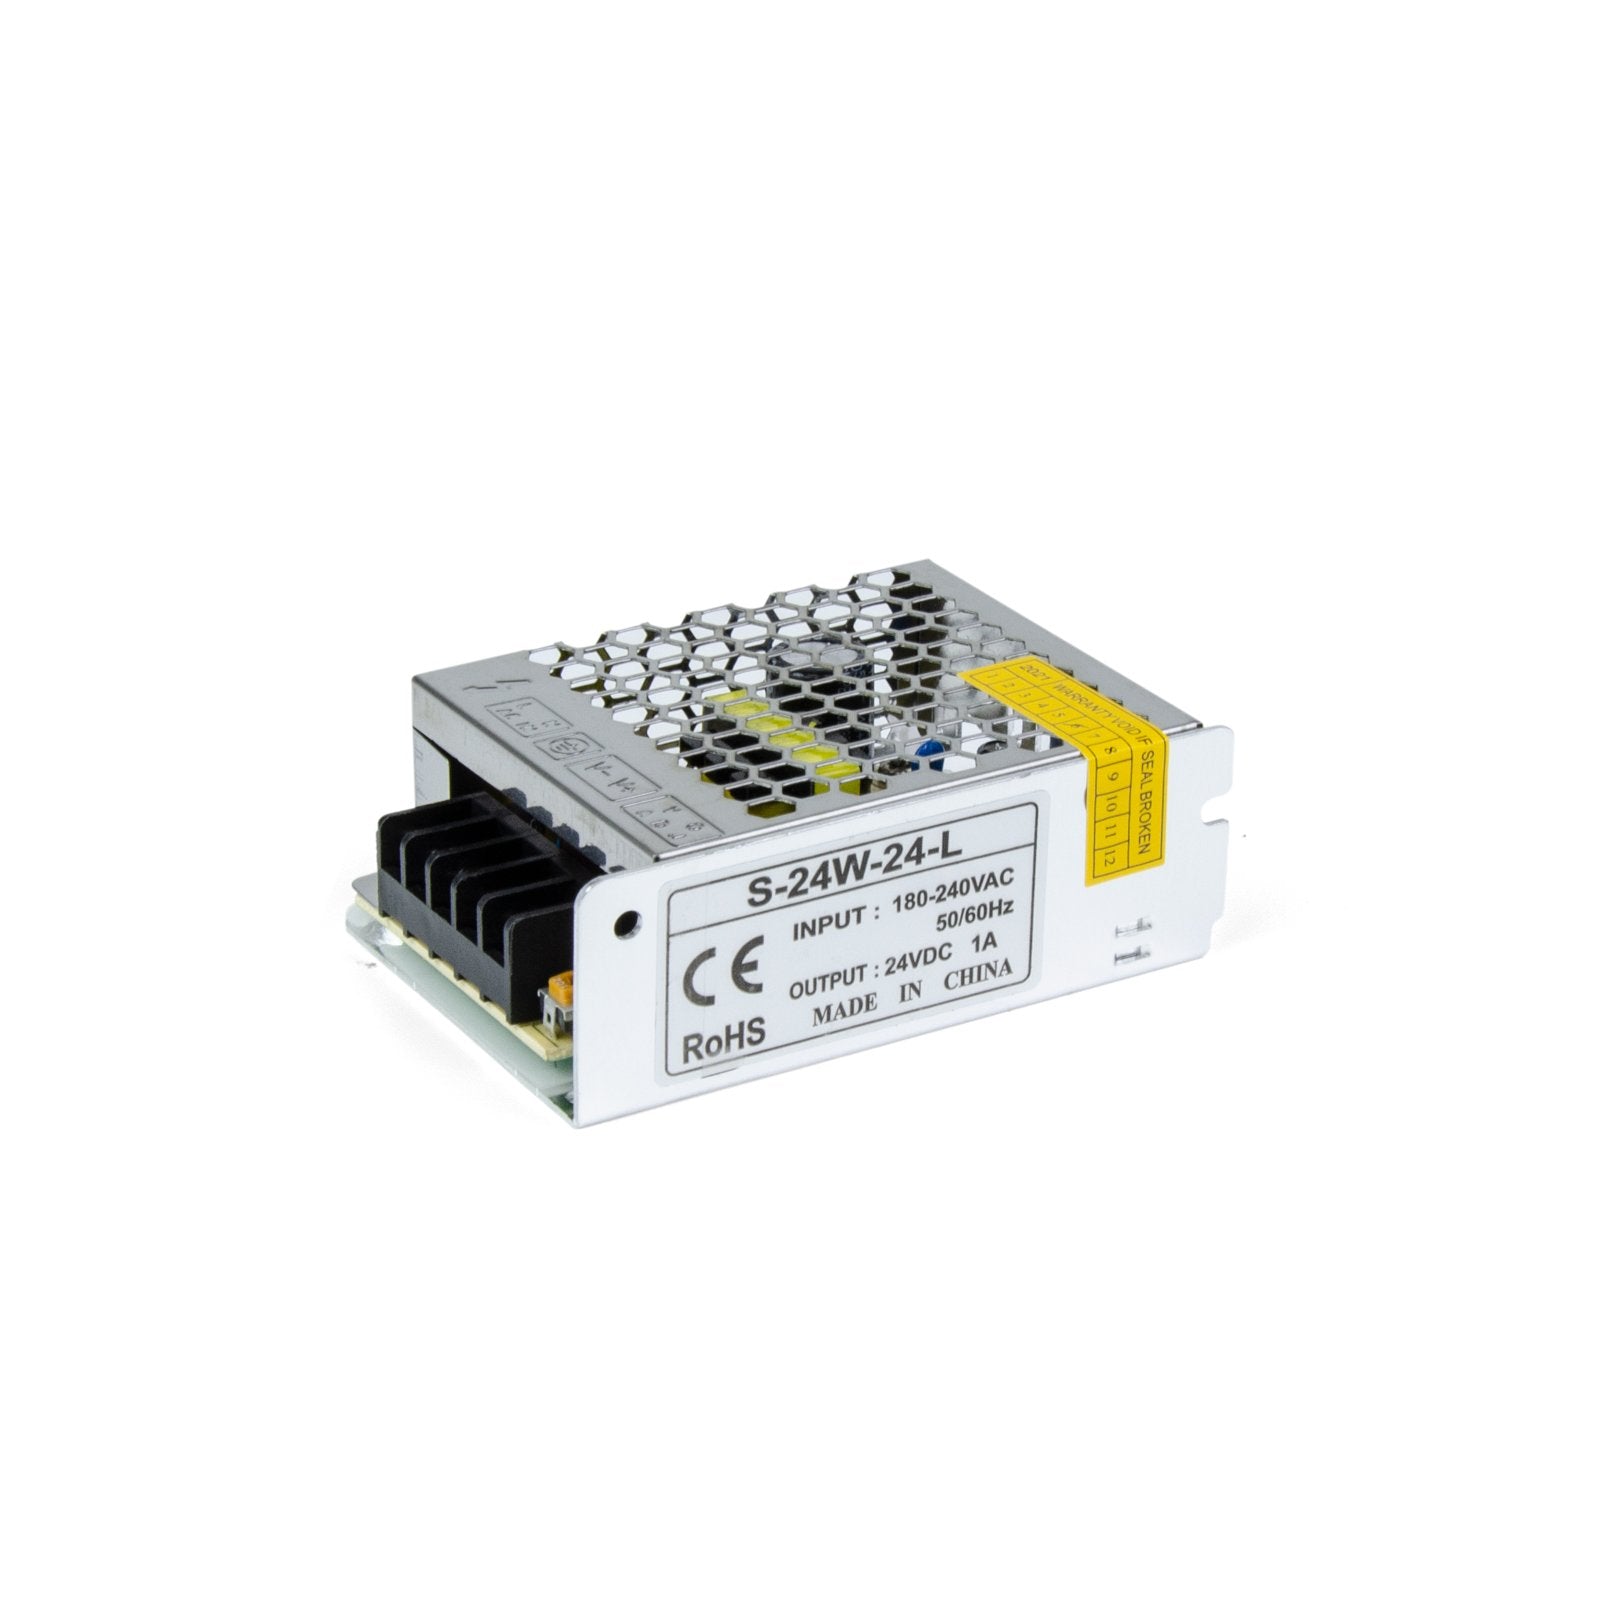 G.W.S LED Wholesale LED Drivers/LED Power Supplies IP20 (Non-Waterproof) 24V 1A 24W LED Driver